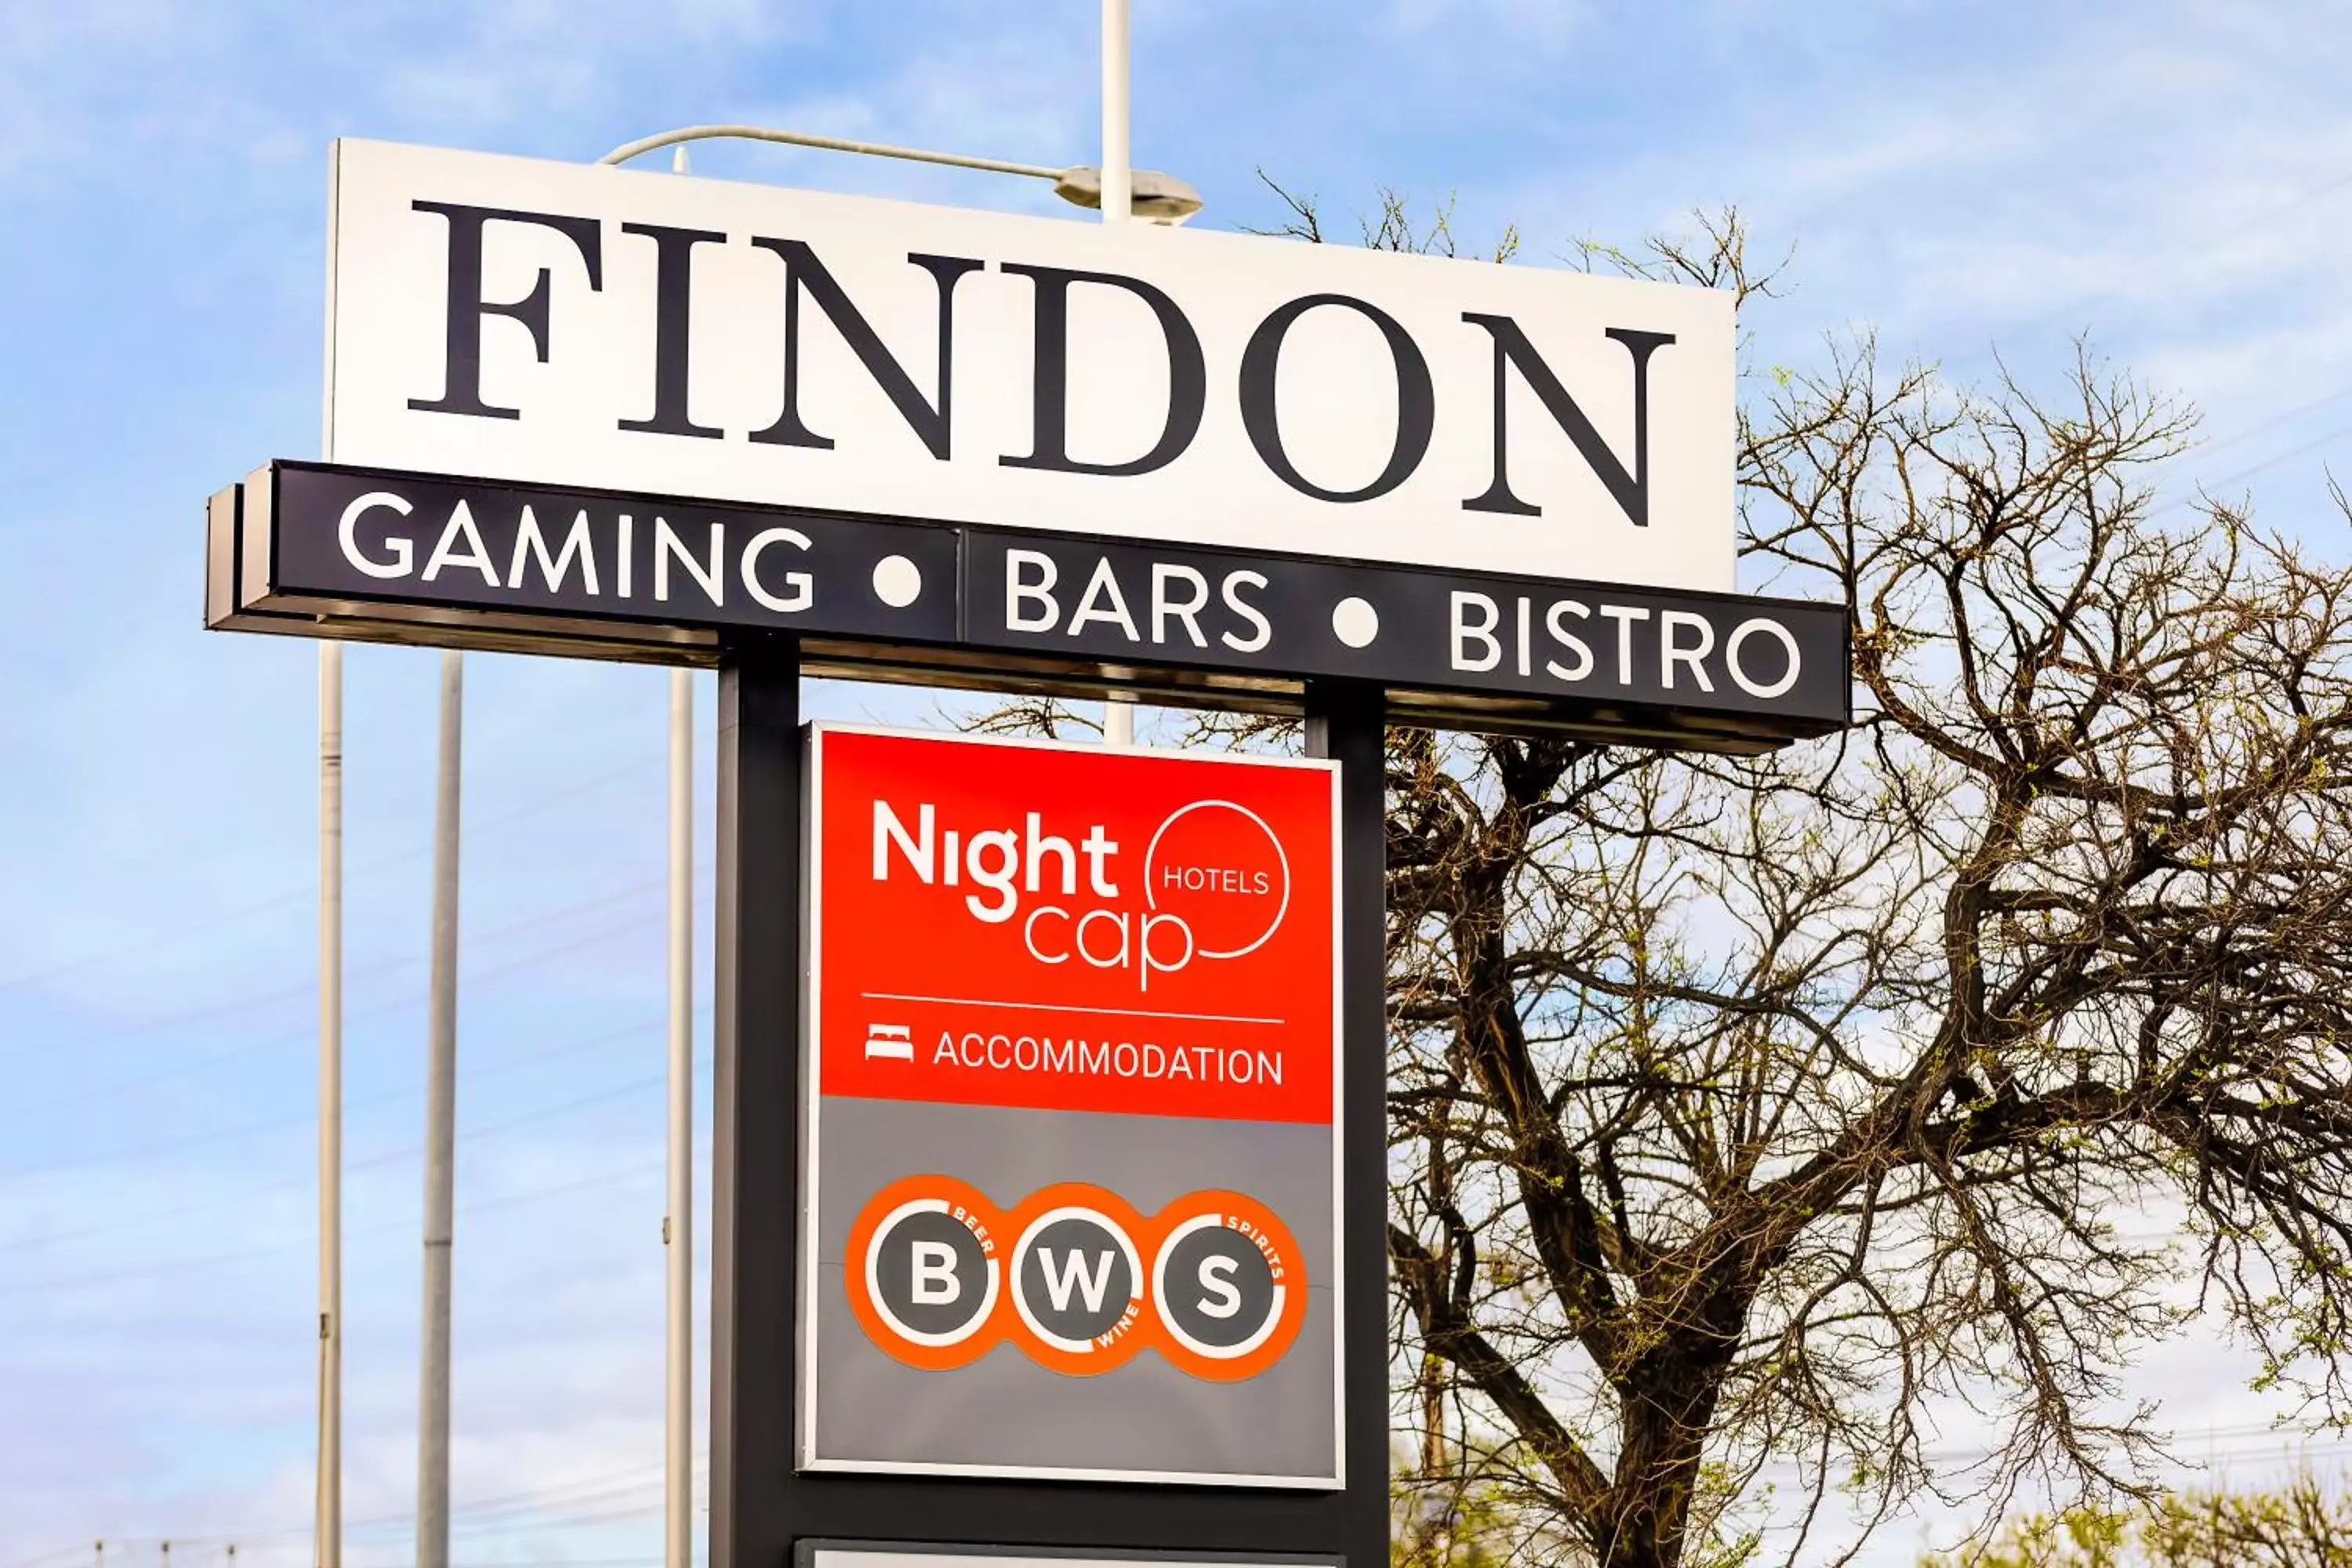 Property logo or sign in Nightcap at Findon Hotel